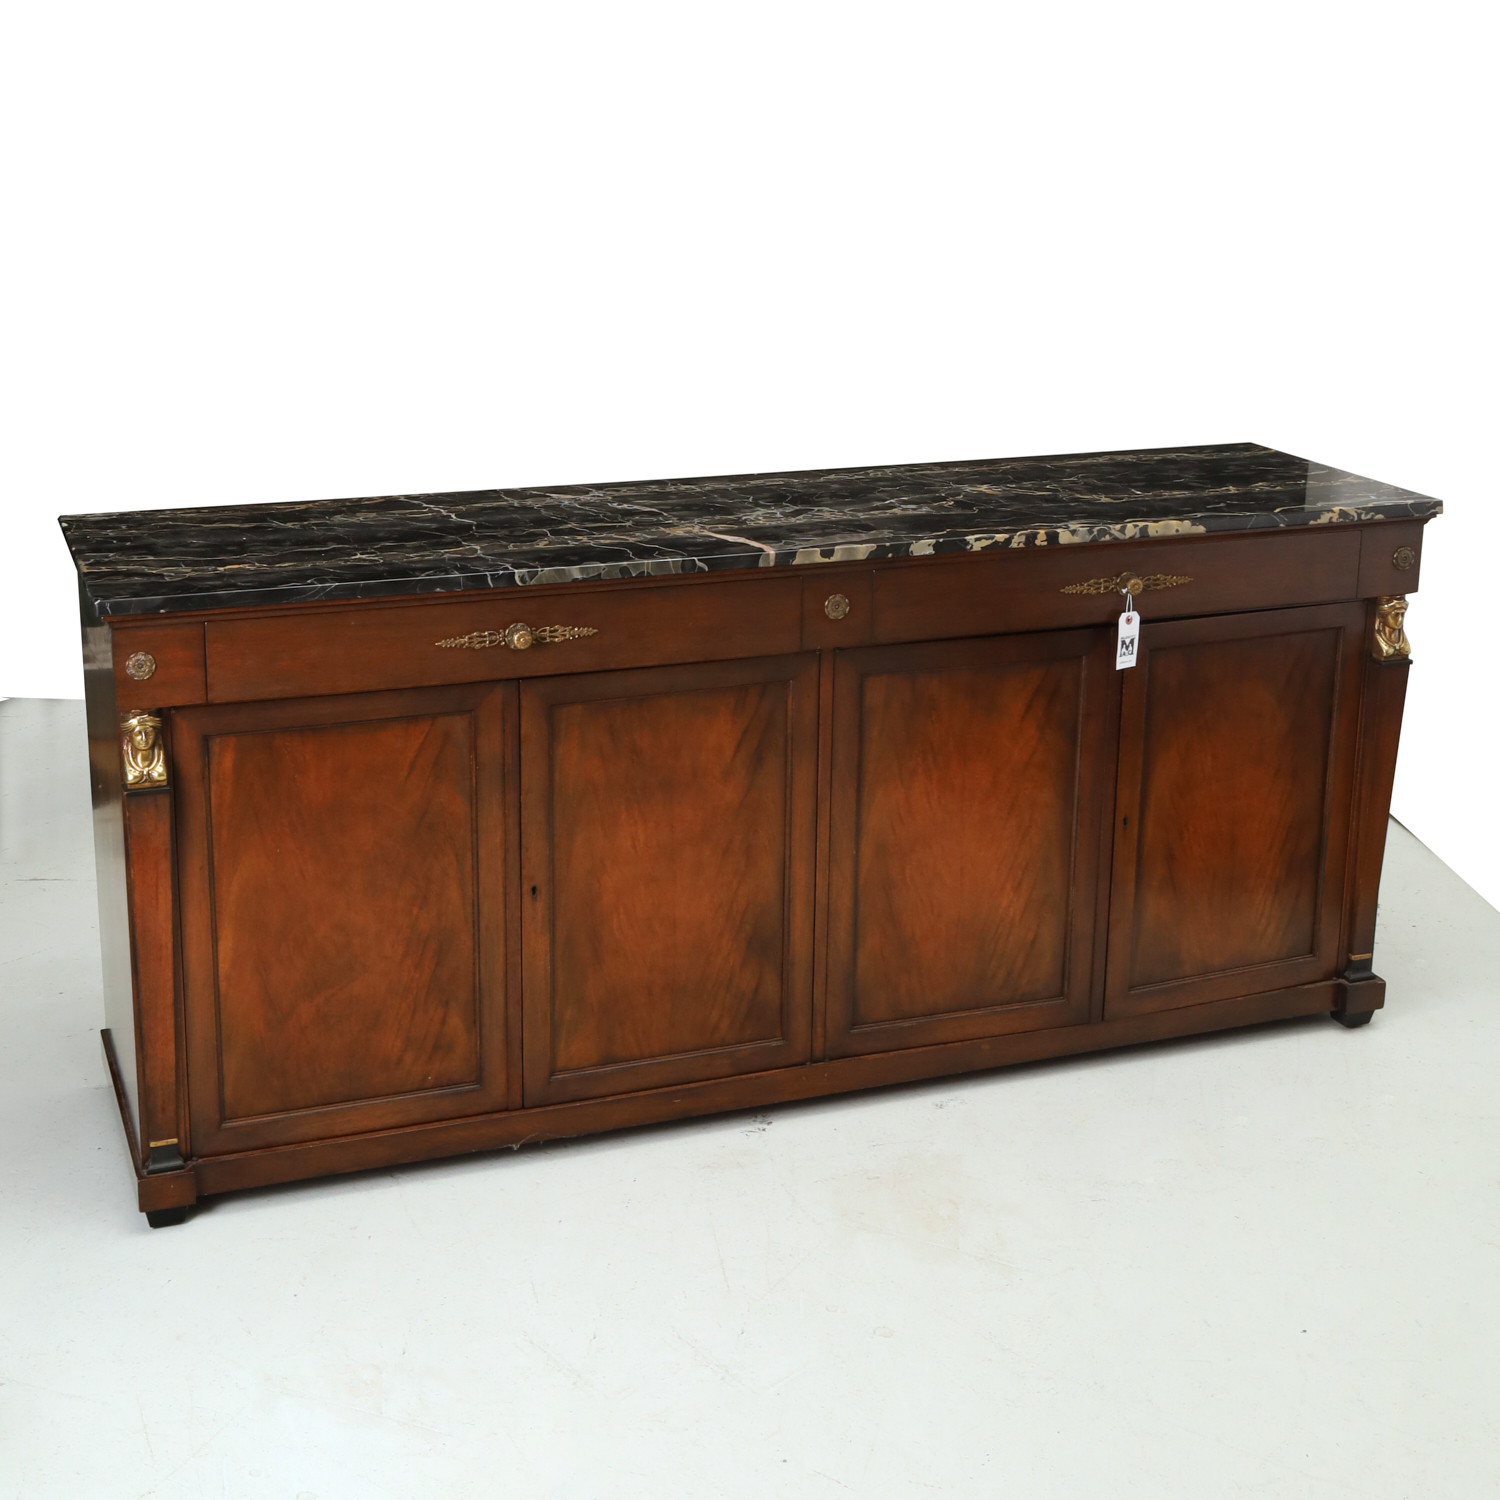 EMPIRE STYLE MARBLE TOP CREDENZA 3619aa